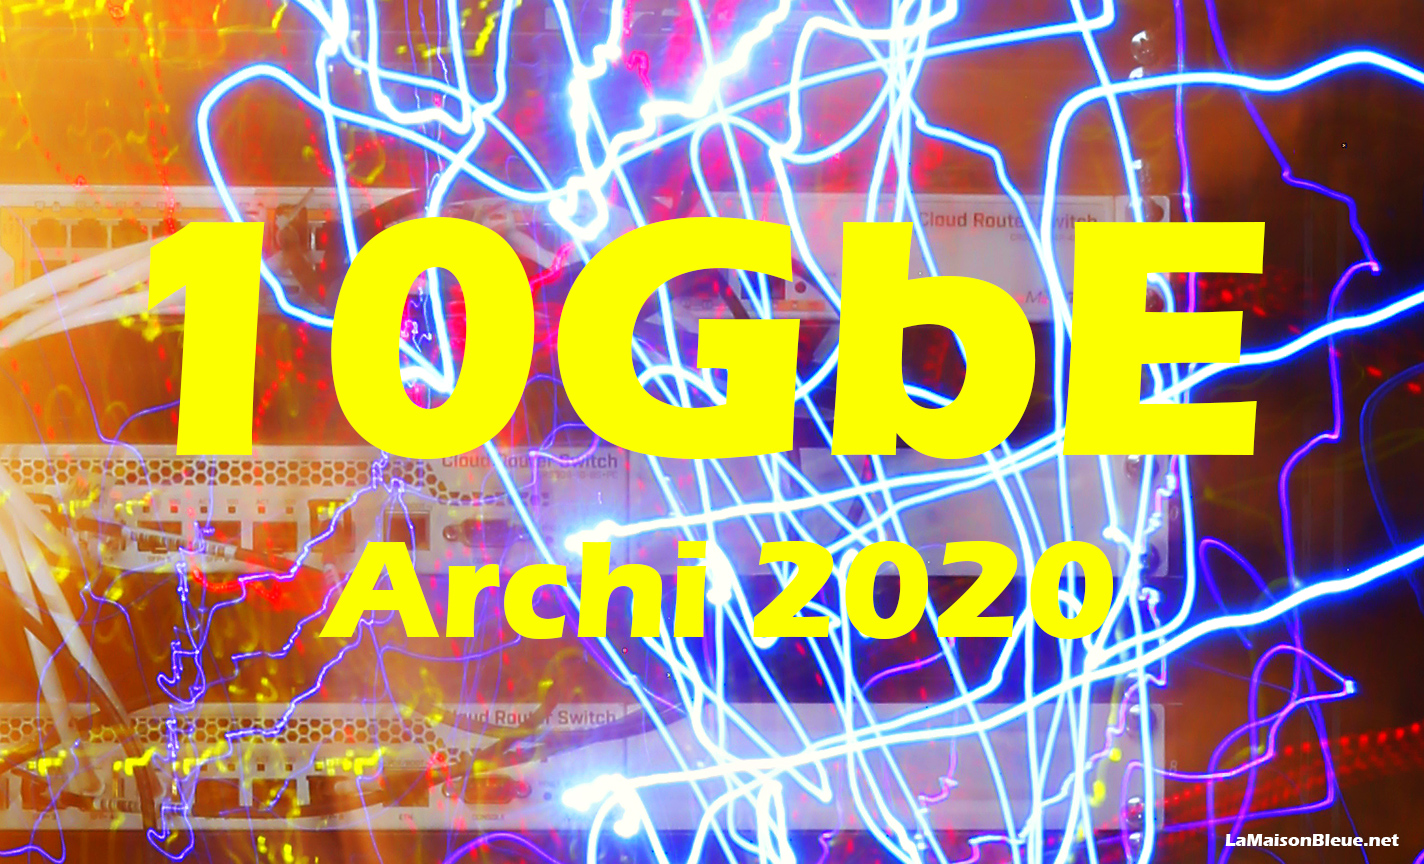 You are currently viewing 10 GbE – Archi 2020